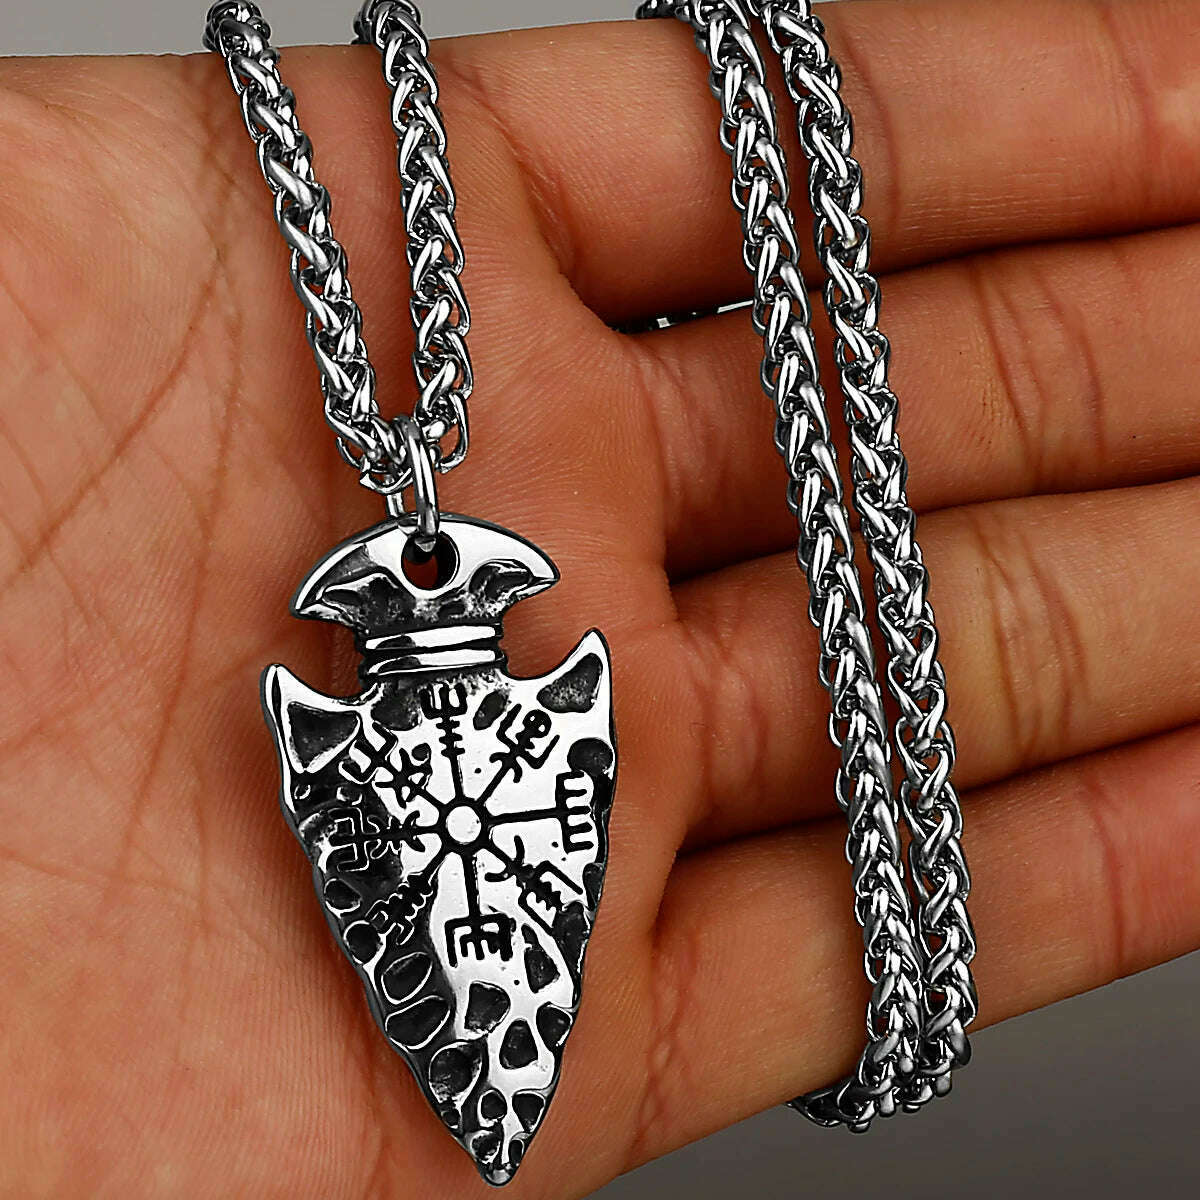 KIMLUD, Viking Vintage Spear Compass Necklace Viking Rune Men Amulet Pathfinder Vegvisir Stainless Steel Pendant Necklace Jewelry Gift, KIMLUD Womens Clothes